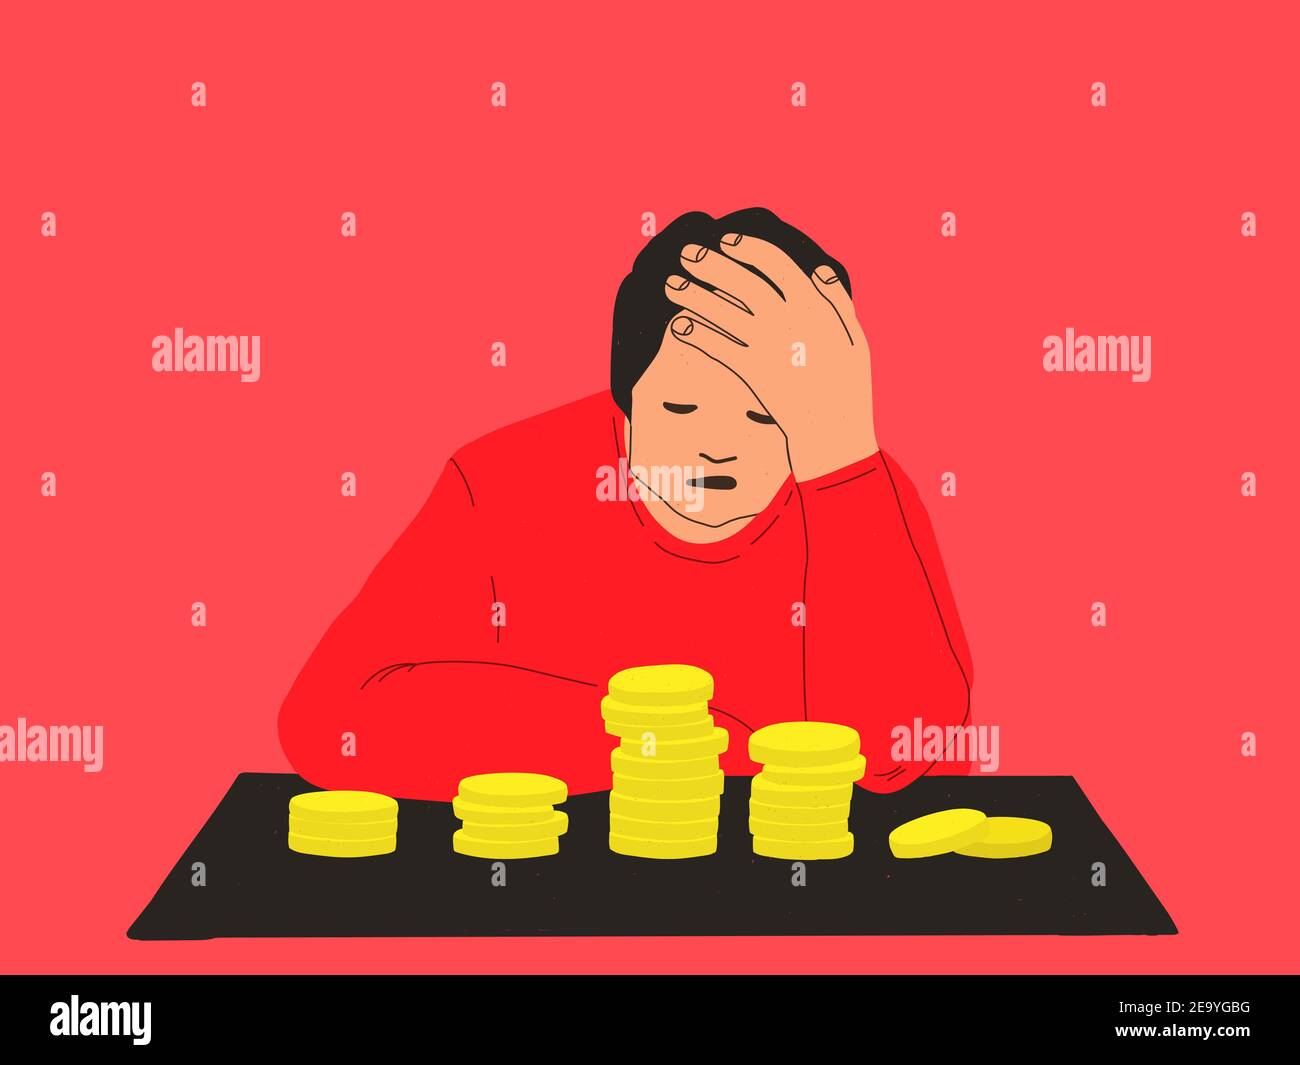 Financial difficulties. Sad man props his face with his hand, sitting at the table with money coins. EPS 10 Stock Vector